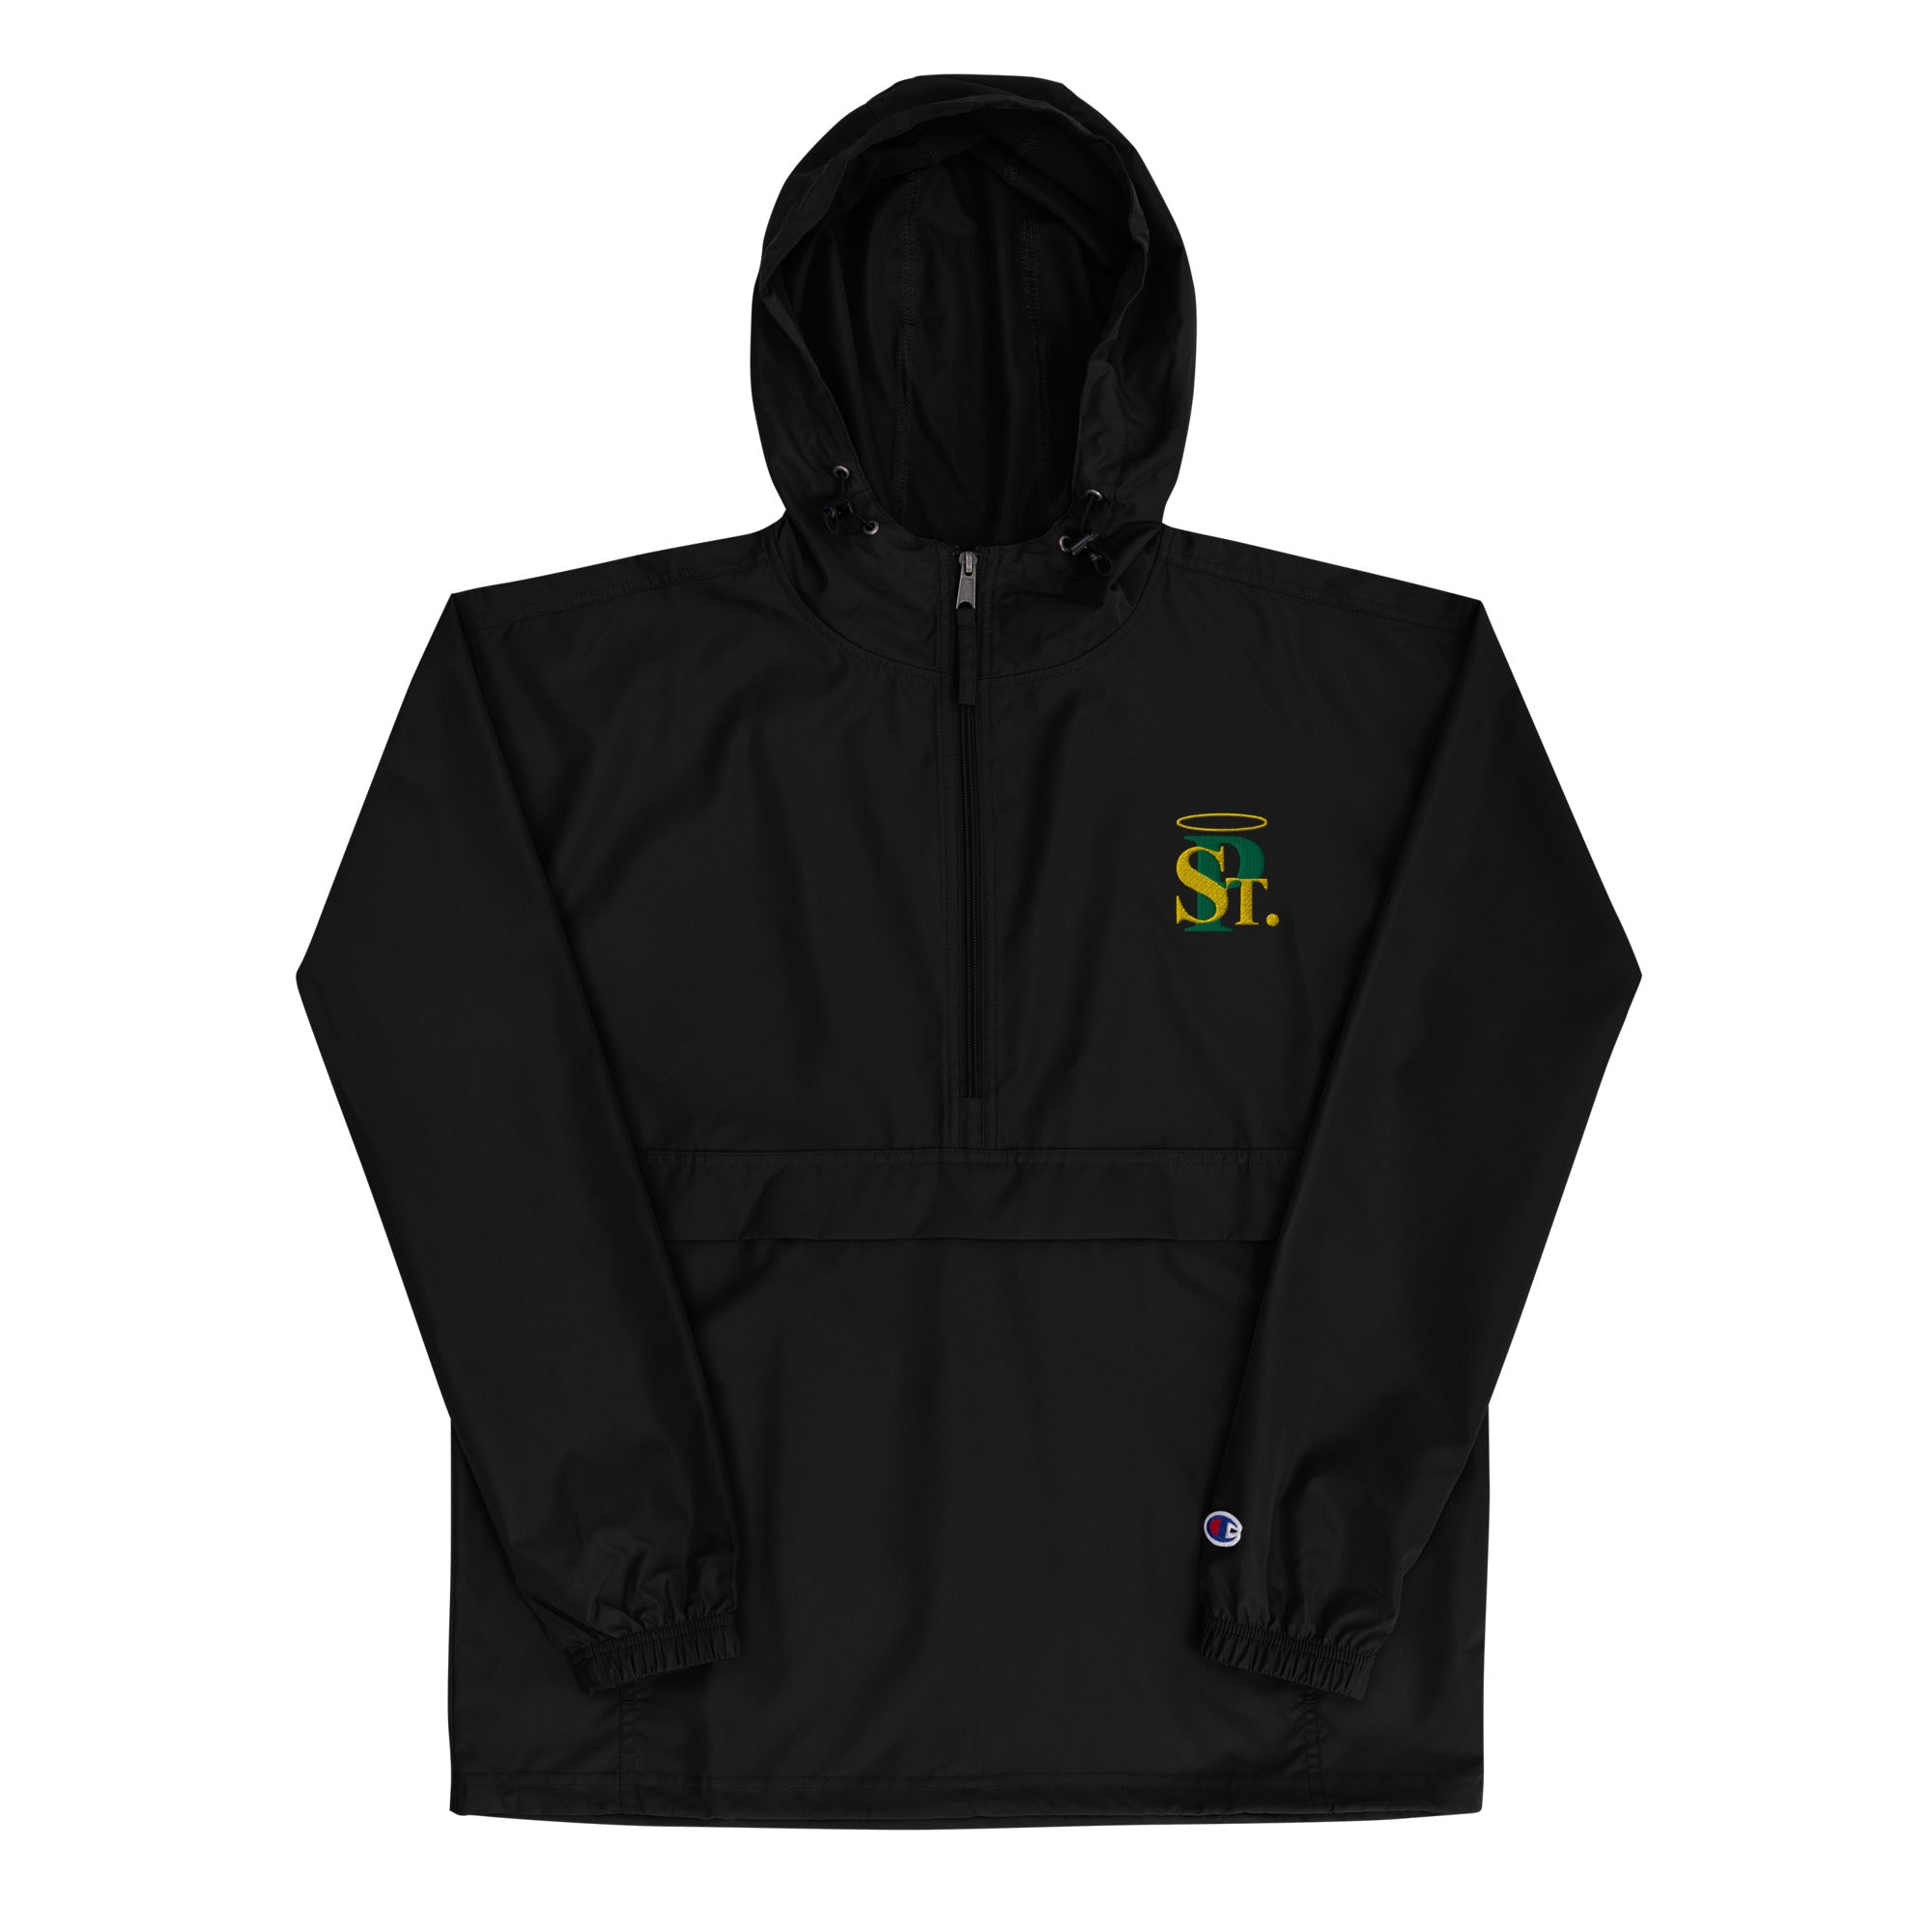 SPCYO Embroidered Champion Packable Jacket